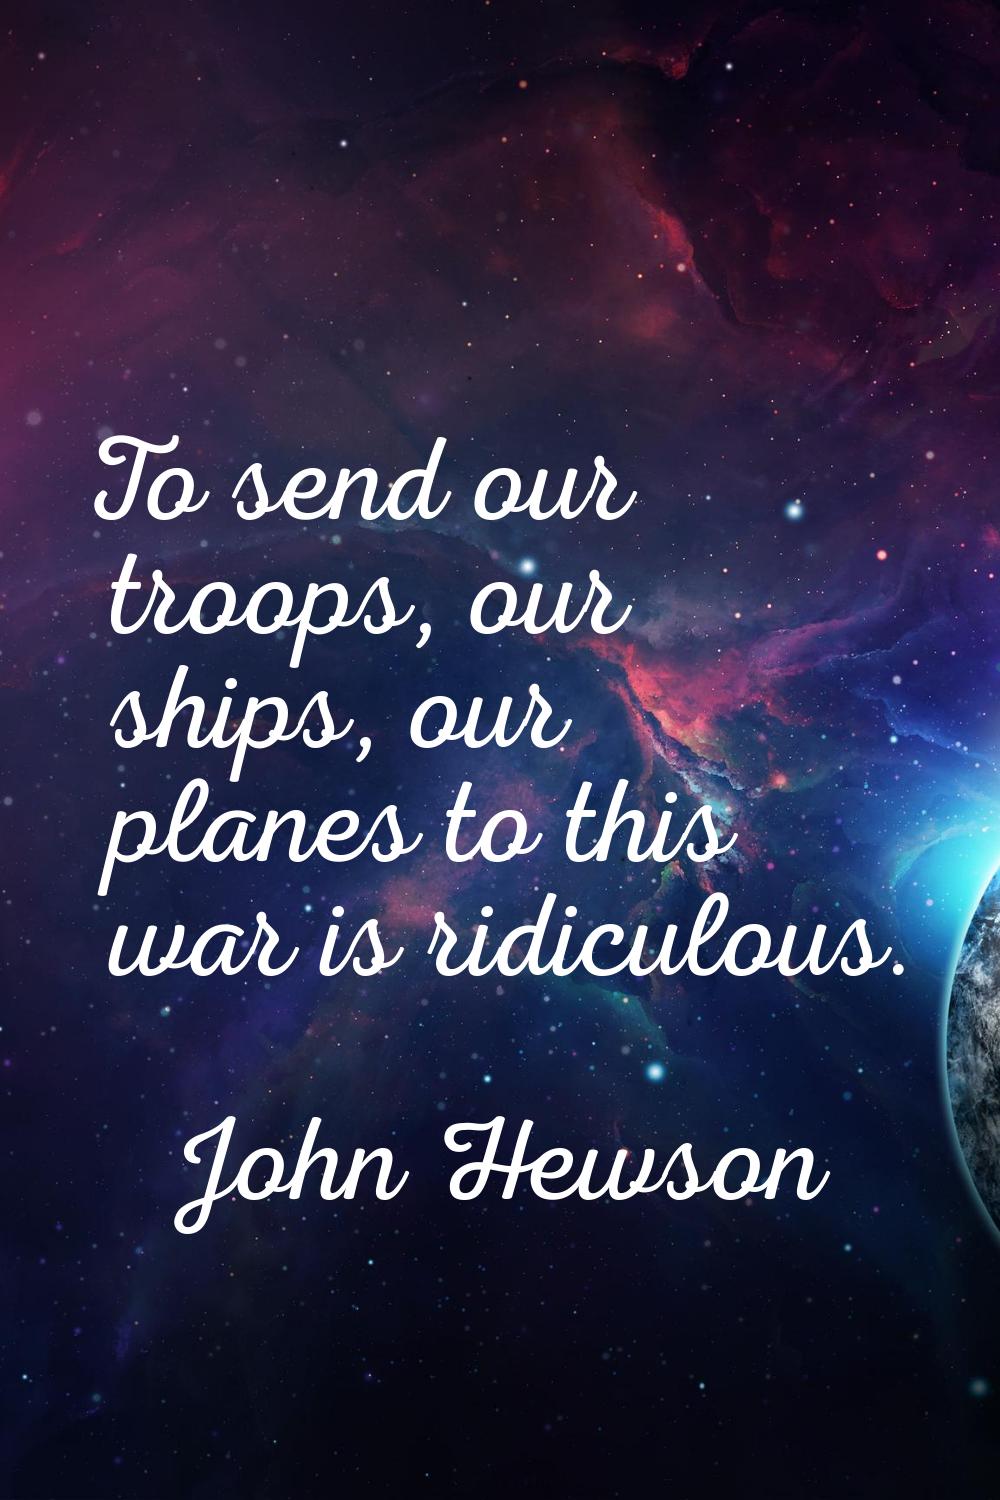 To send our troops, our ships, our planes to this war is ridiculous.